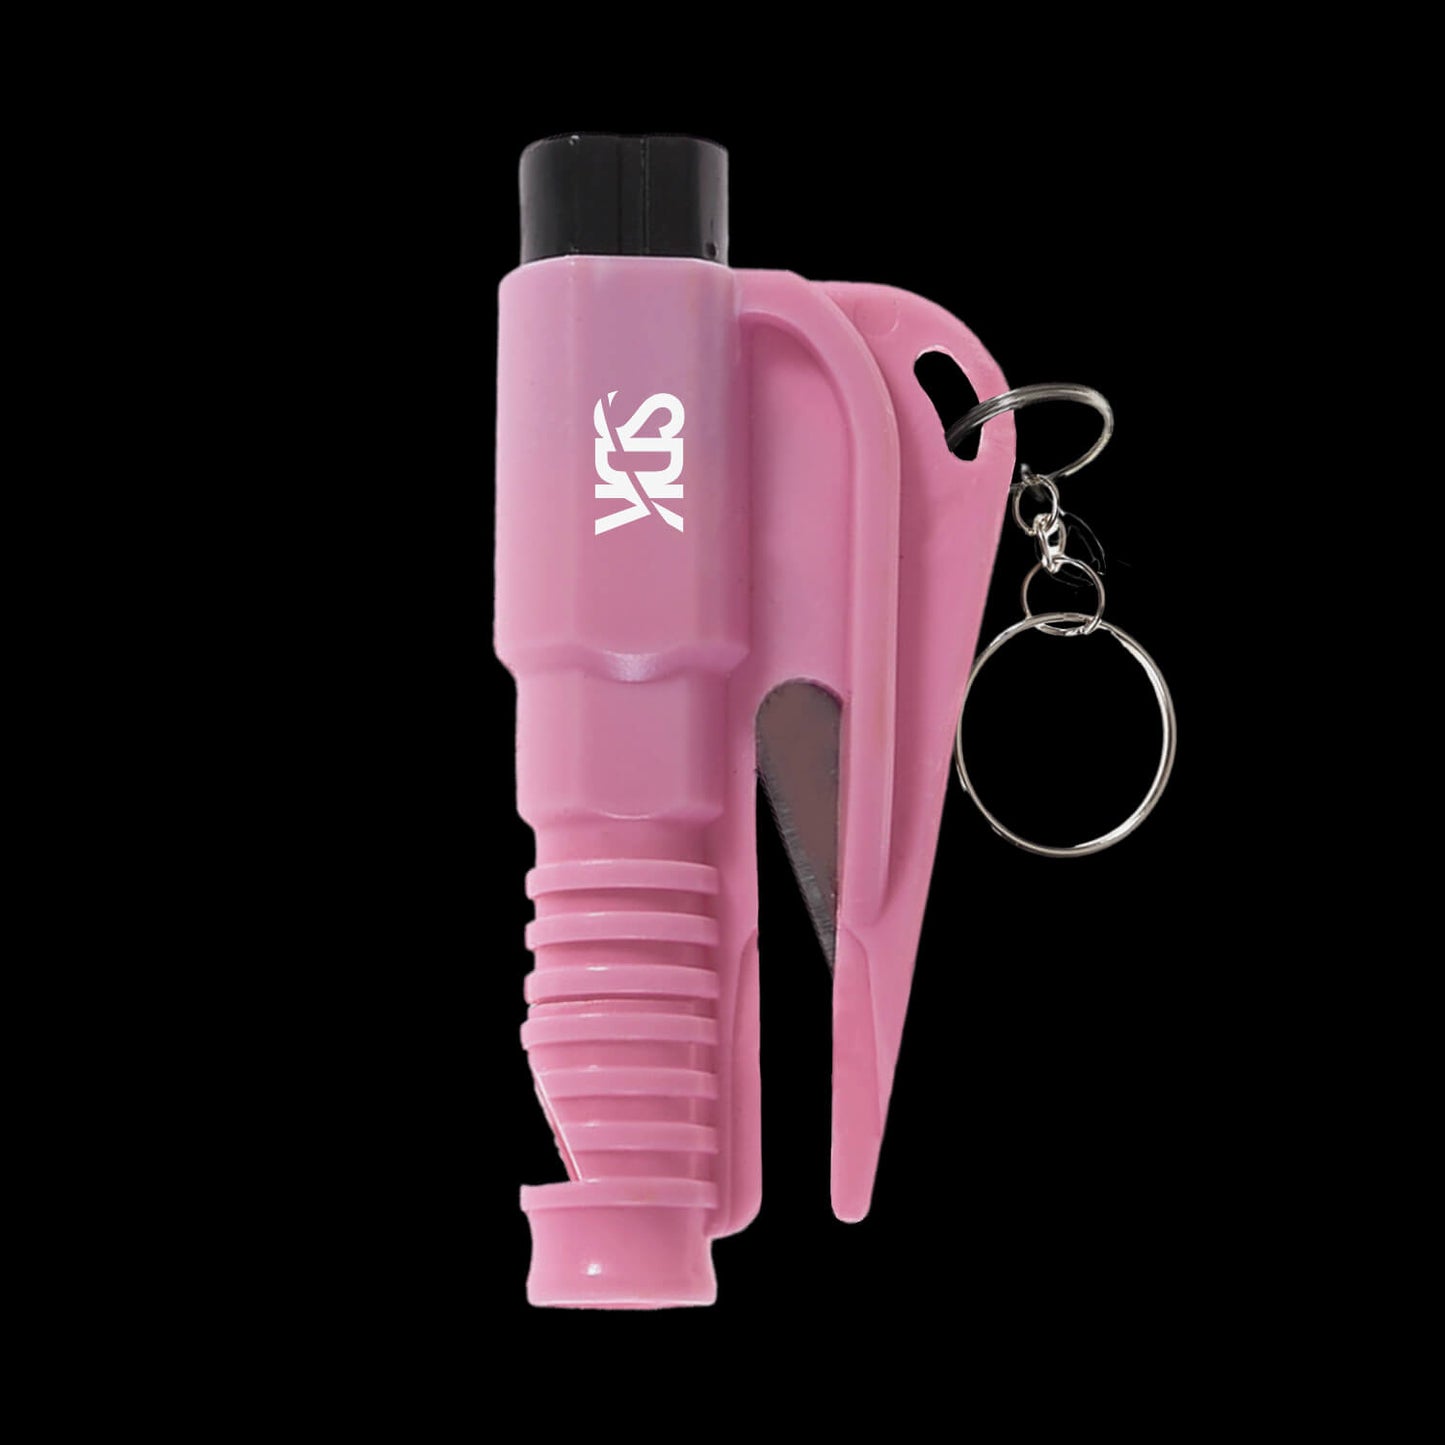 SDK Kit Pink Escape Tool (all-in-one seat belt cutter, window breaker and whistle)